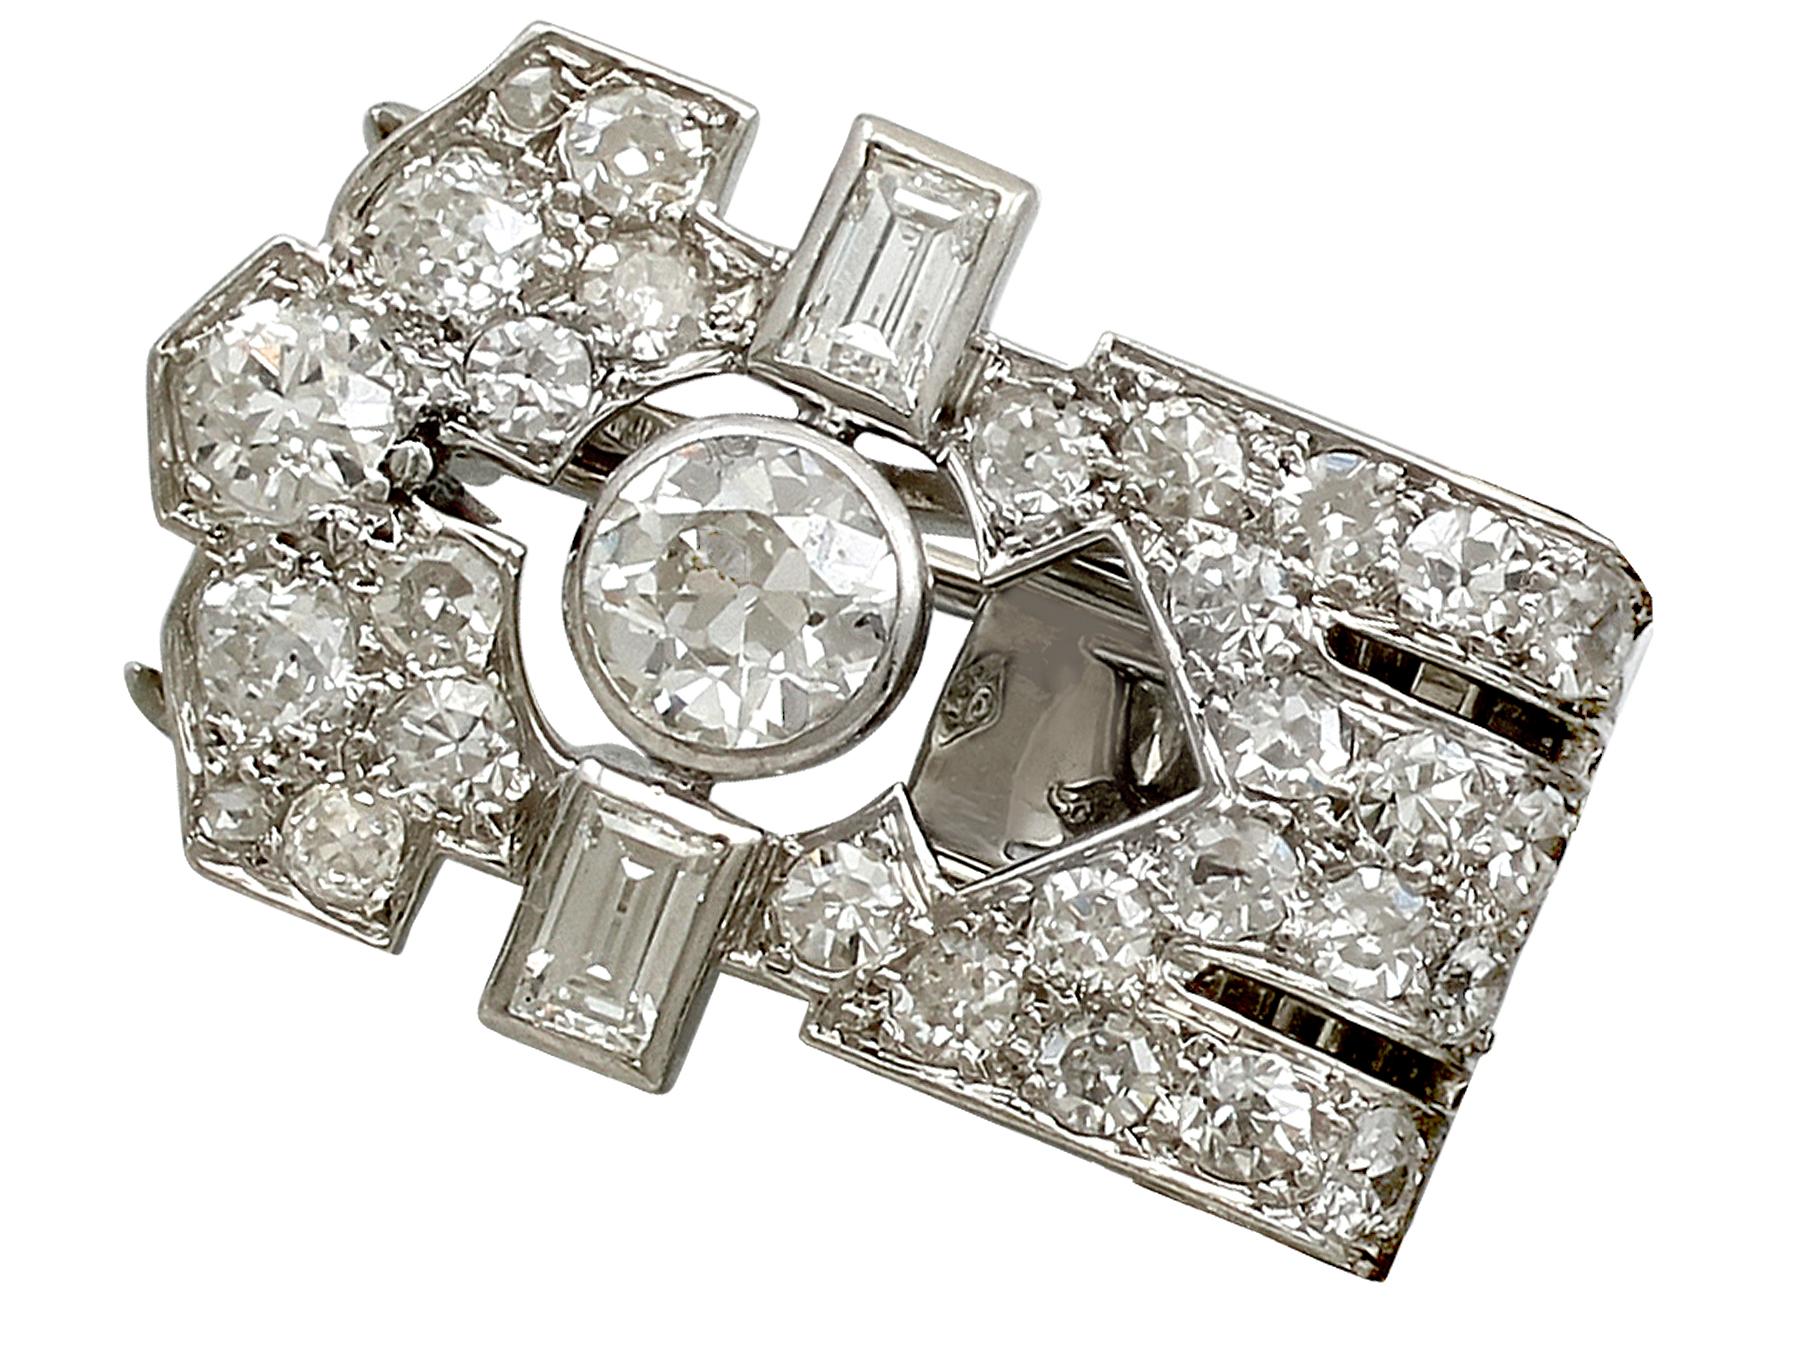 Antique French 2.58 Carat Diamond, Platinum and White Gold Double Clip Brooch 2